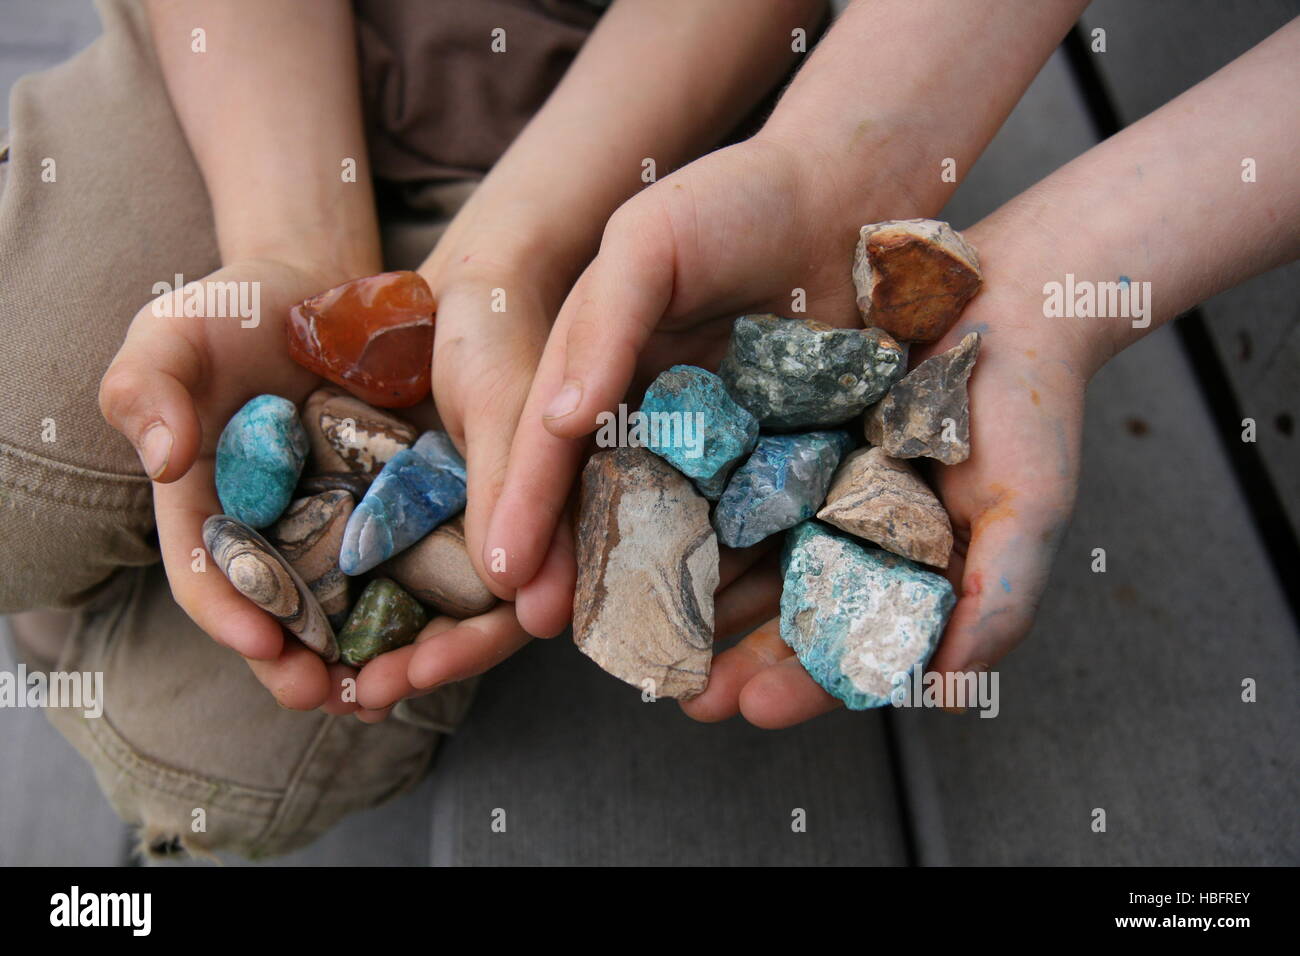 children holding rocks before and after being polished including sandstone and agate Stock Photo